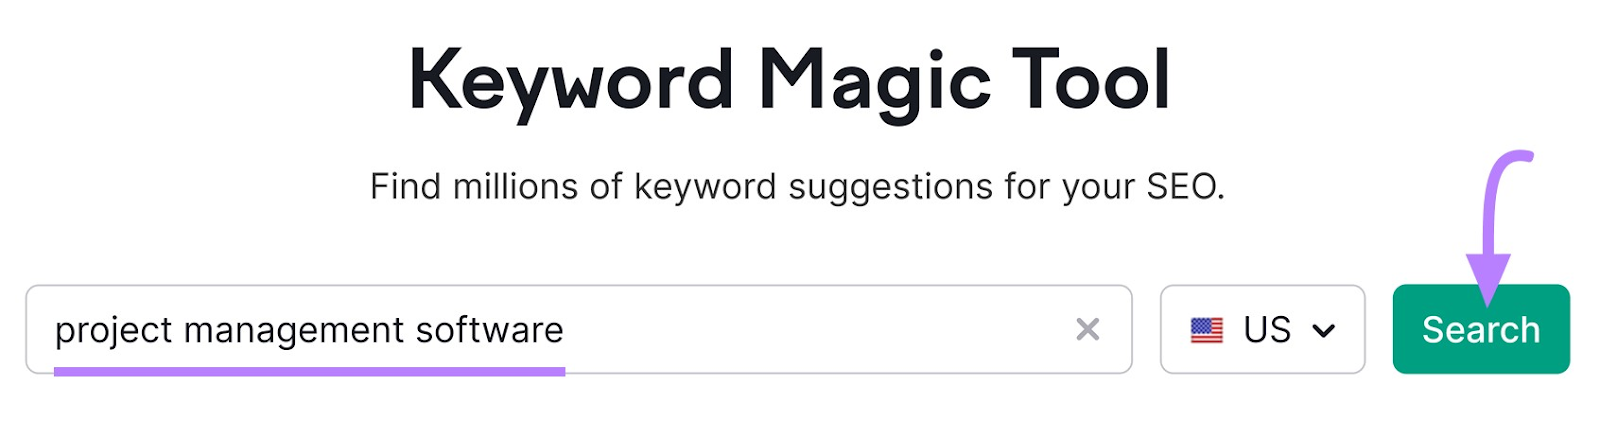 "project management software" entered into the Keyword Magic Tool search bar